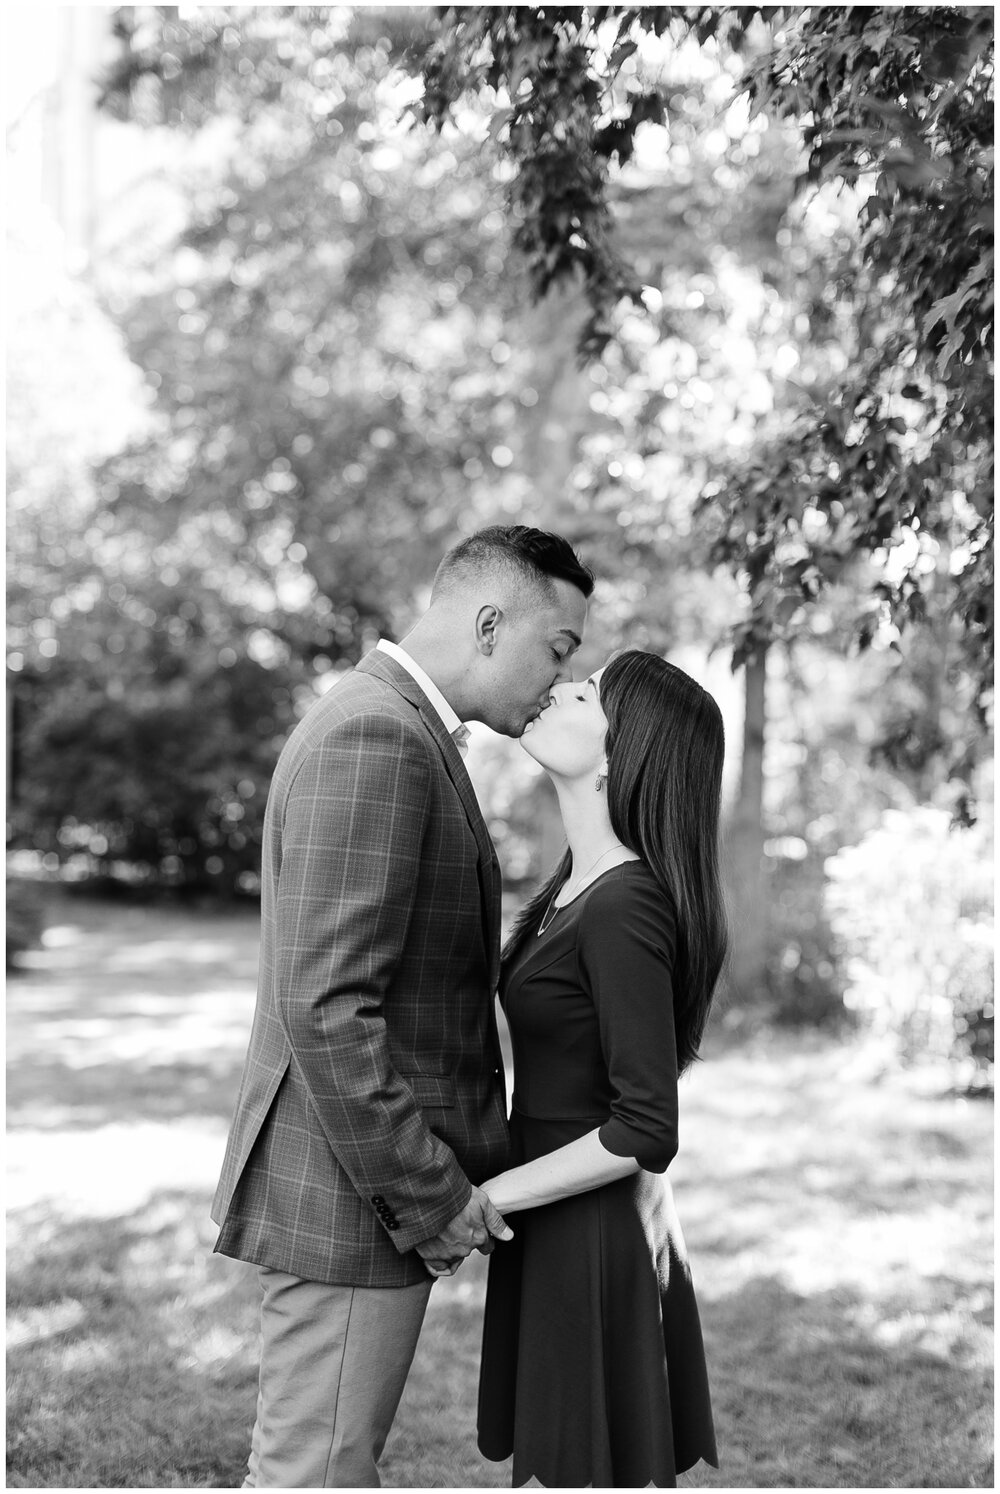 Naperville_Engagement_Kat_and_Zach_bw-50.jpg